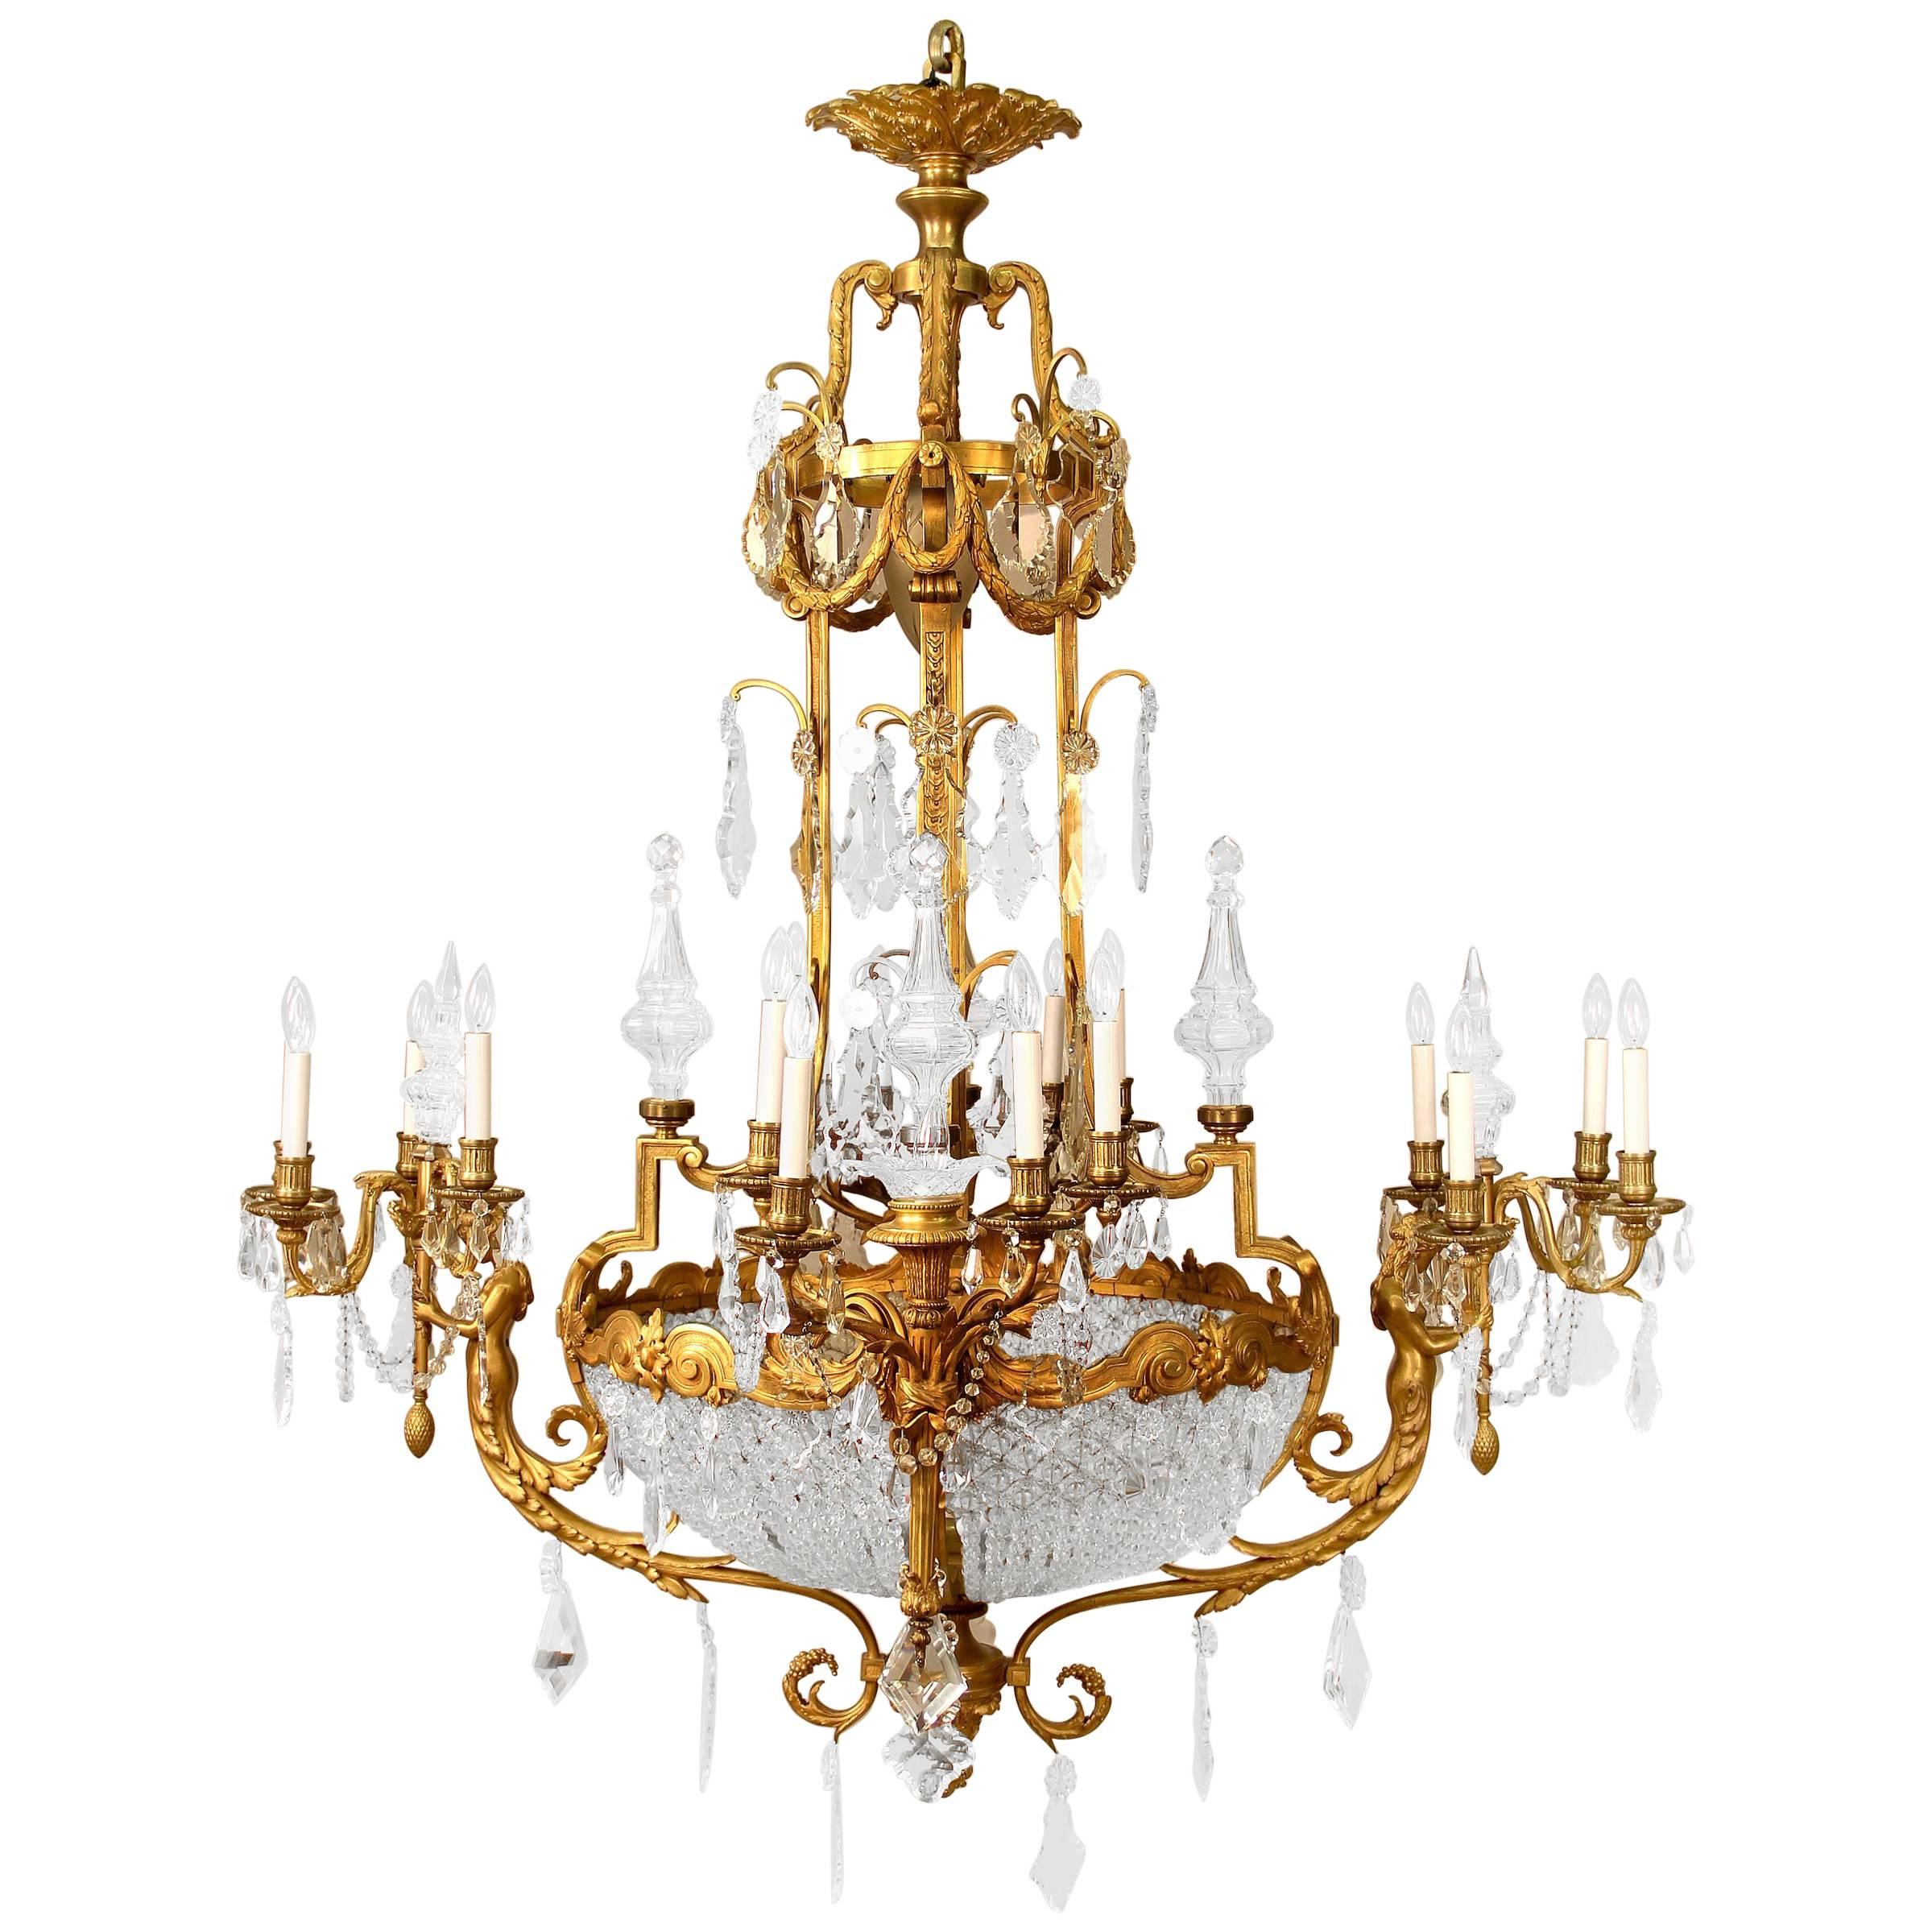 Palatial Late 19th Century Gilt Bronze and Cut Crystal Chandelier by Mottheau